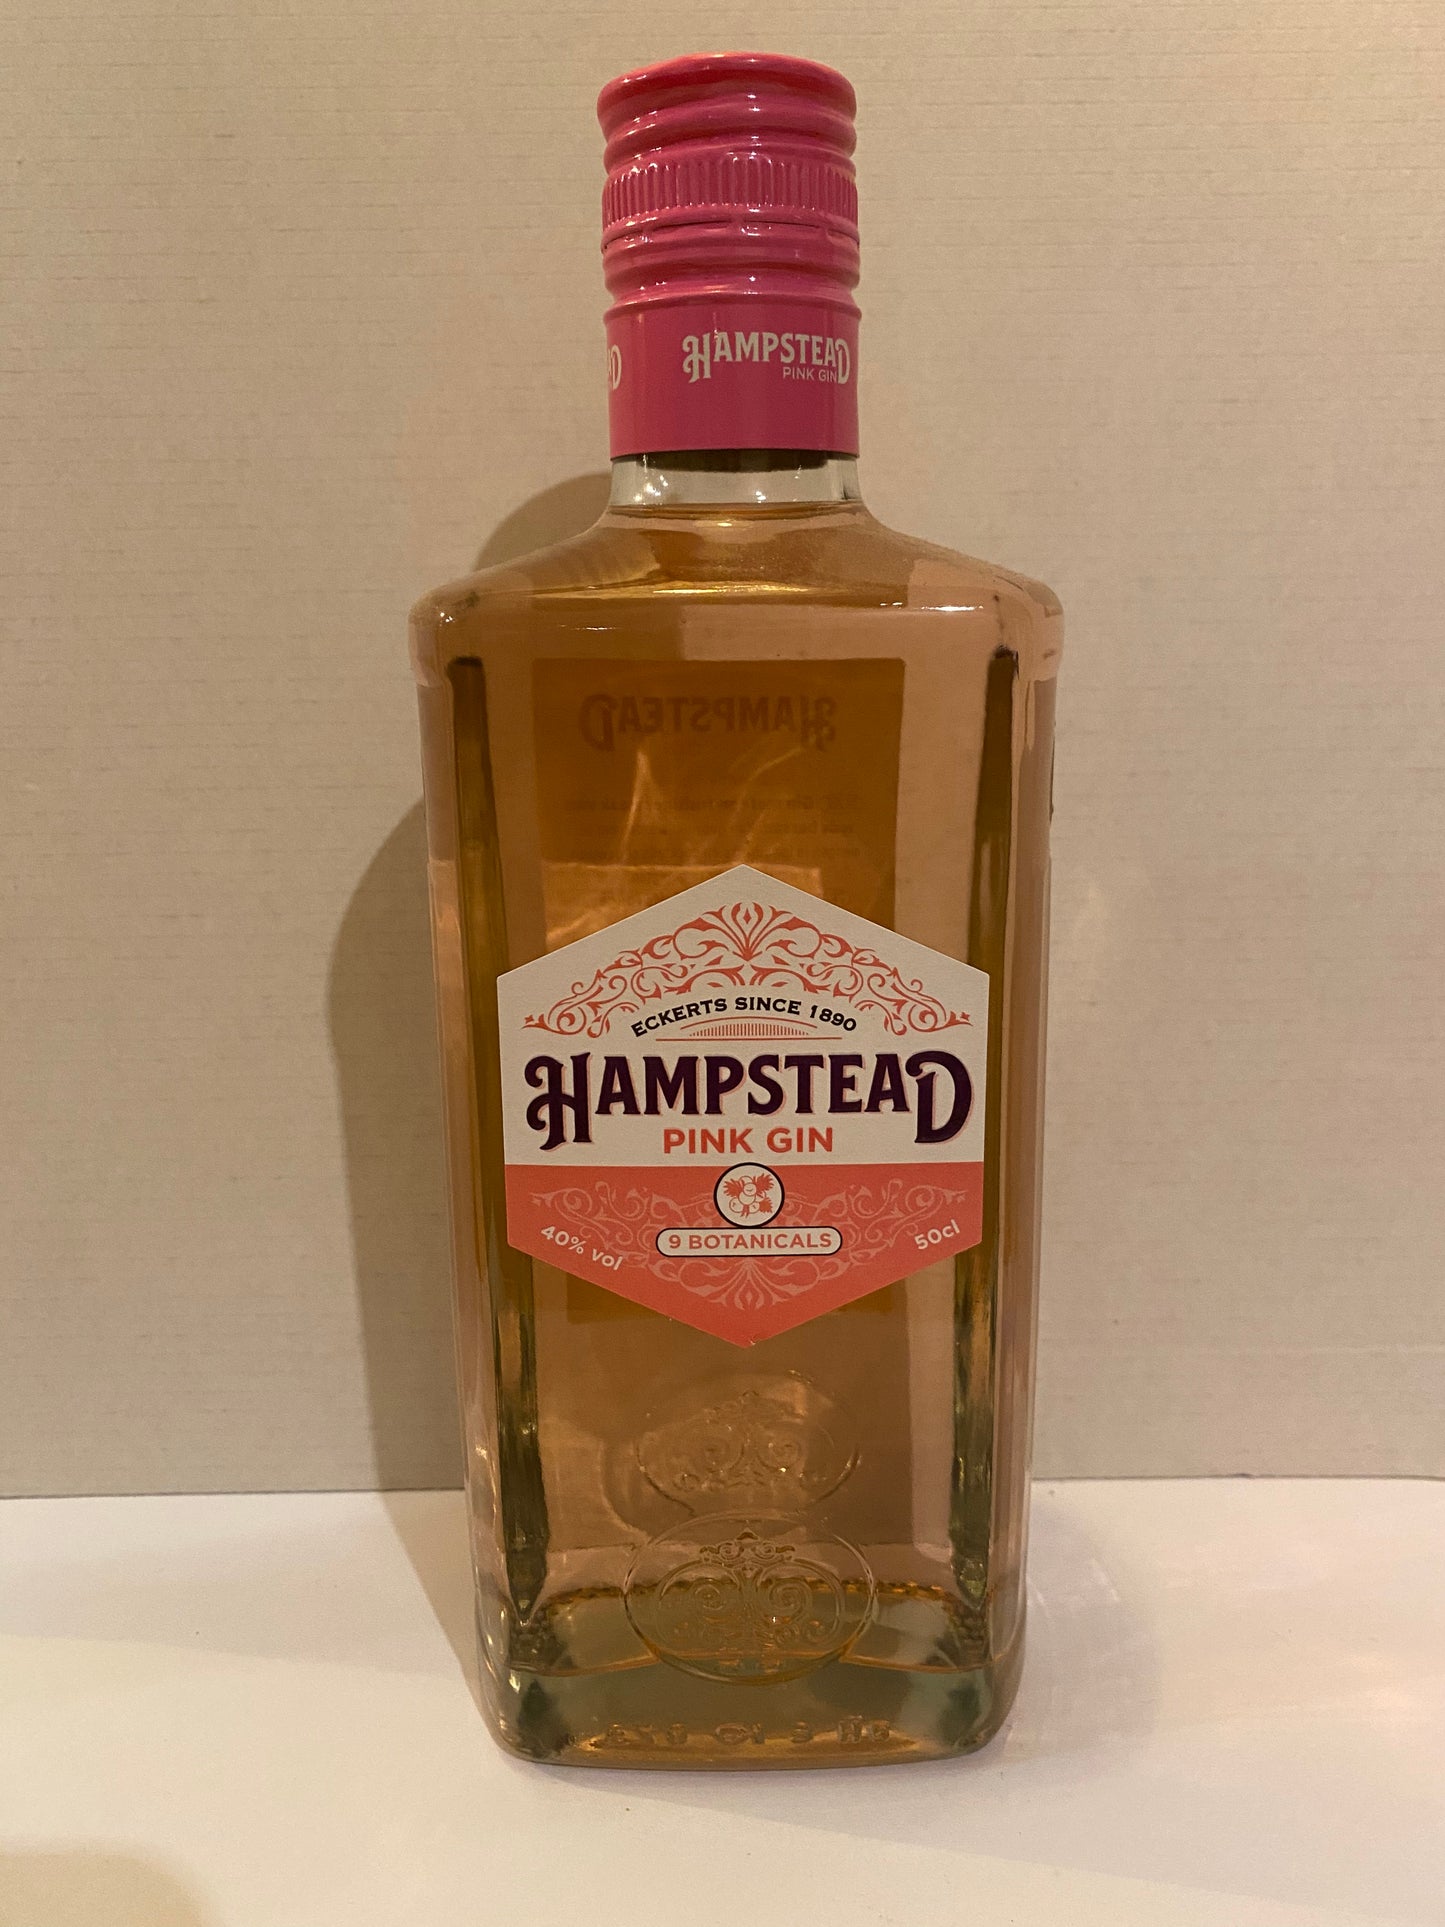 Hampstead Pink Gin – House Gin of